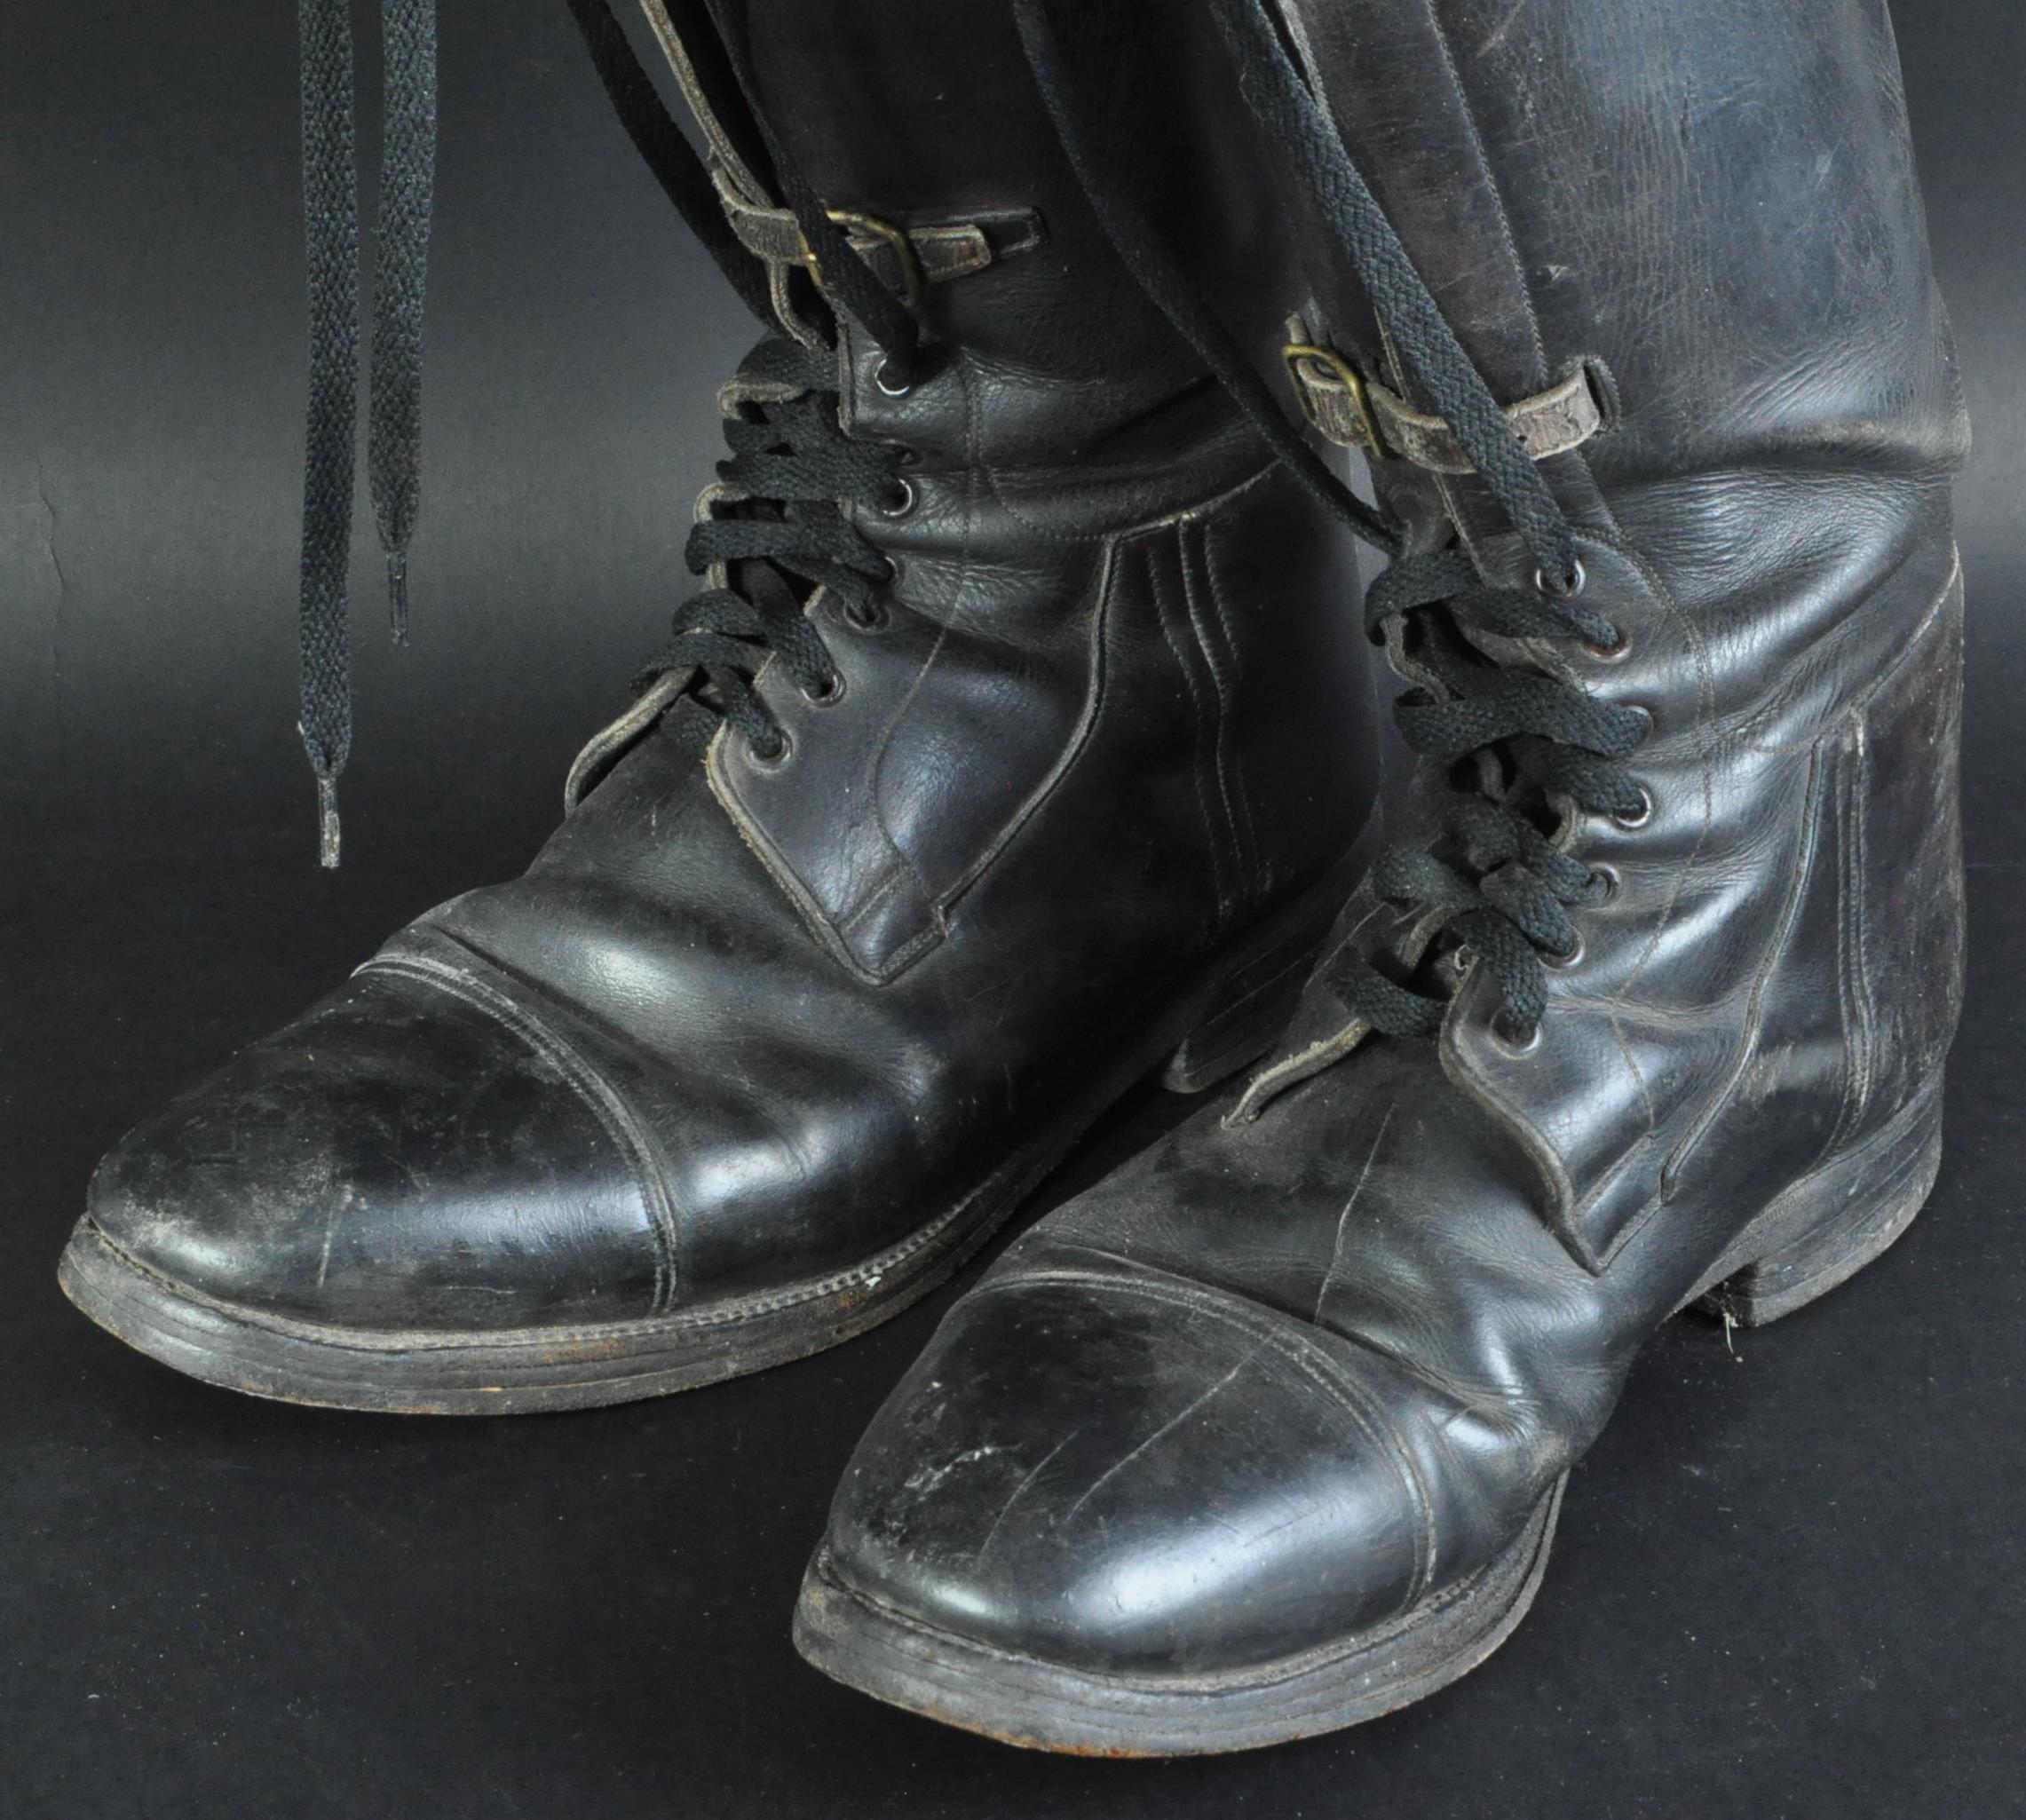 WWI FIRST WORLD WAR INTEREST - ROYAL FLYING CORPS BOOTS - Image 3 of 6